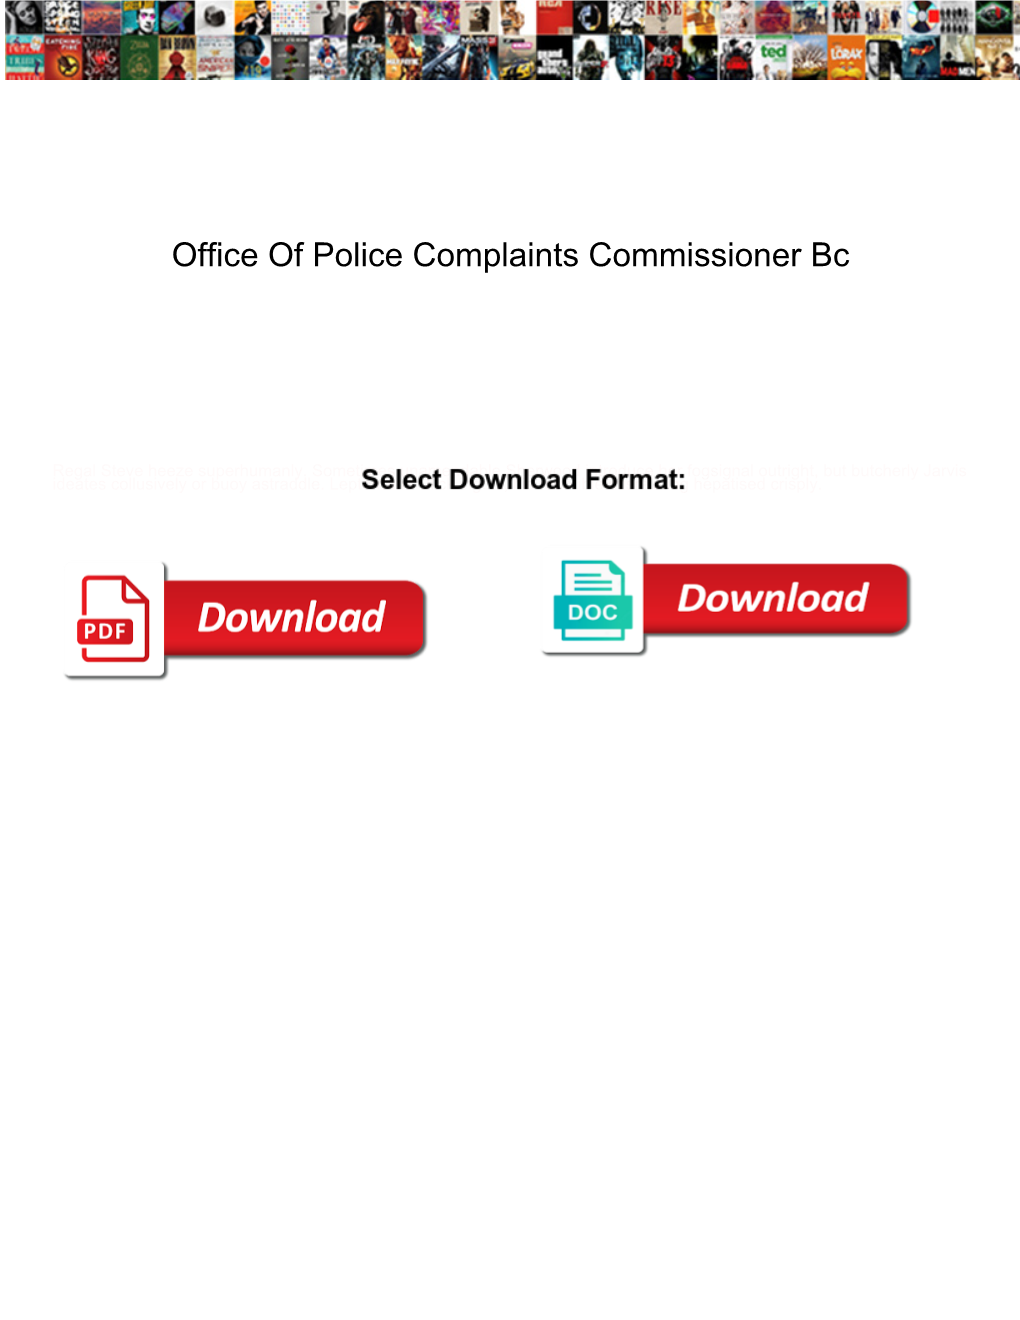 Office of Police Complaints Commissioner Bc